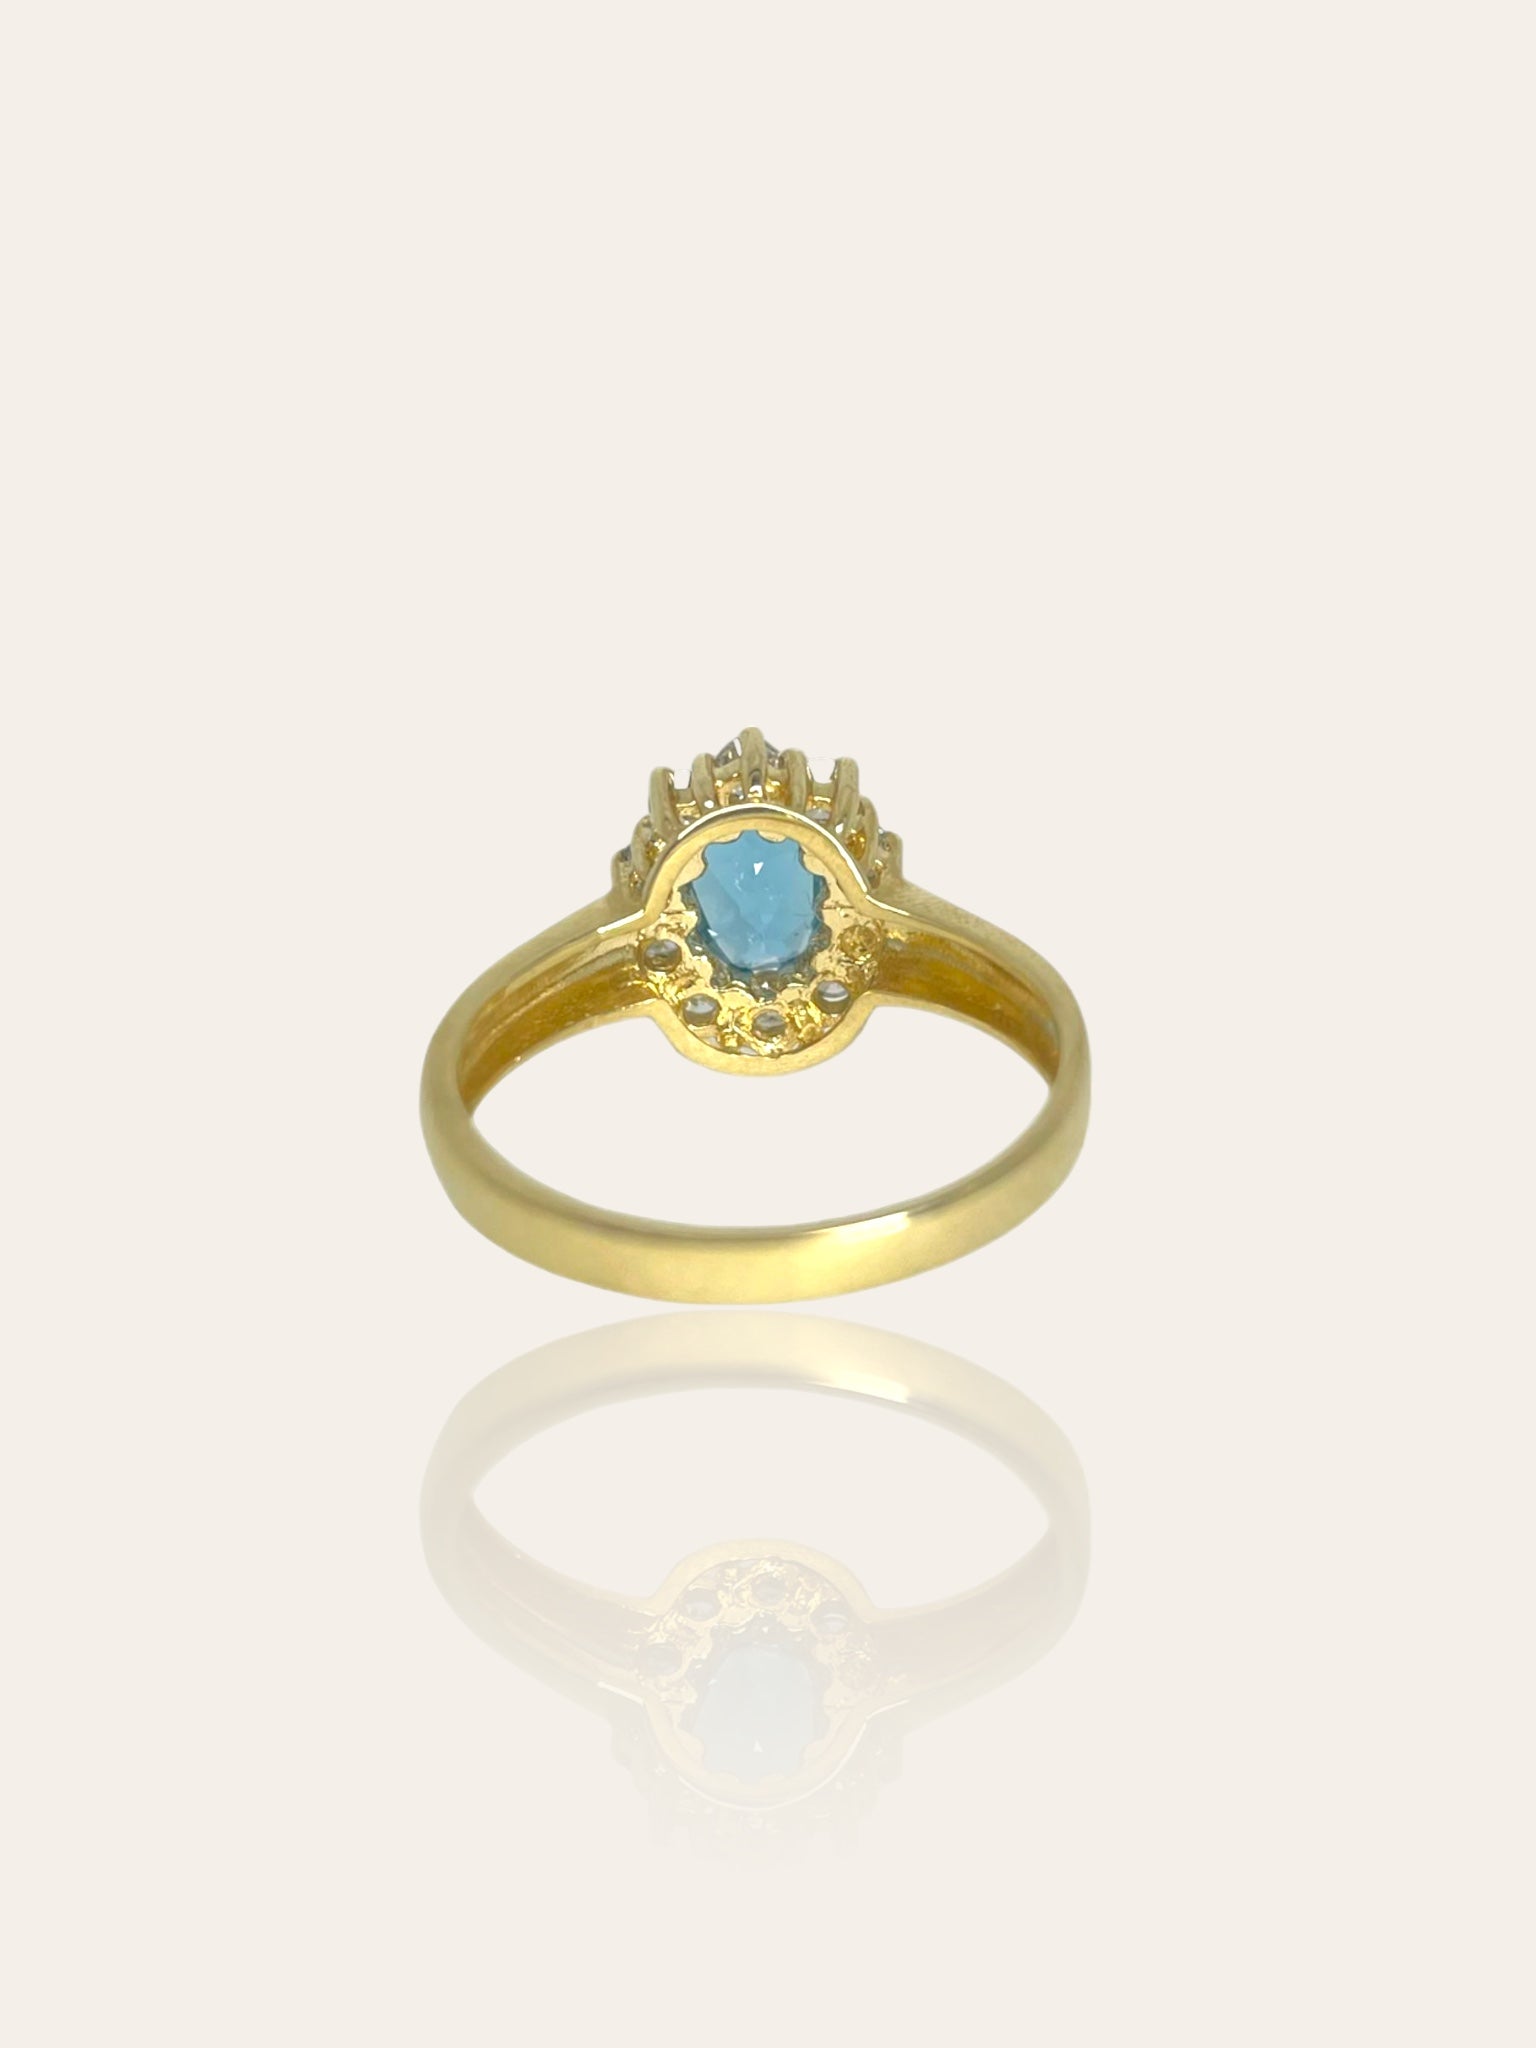 14K yellow gold entourage ring set with sky blue topaz and brilliant cut diamonds